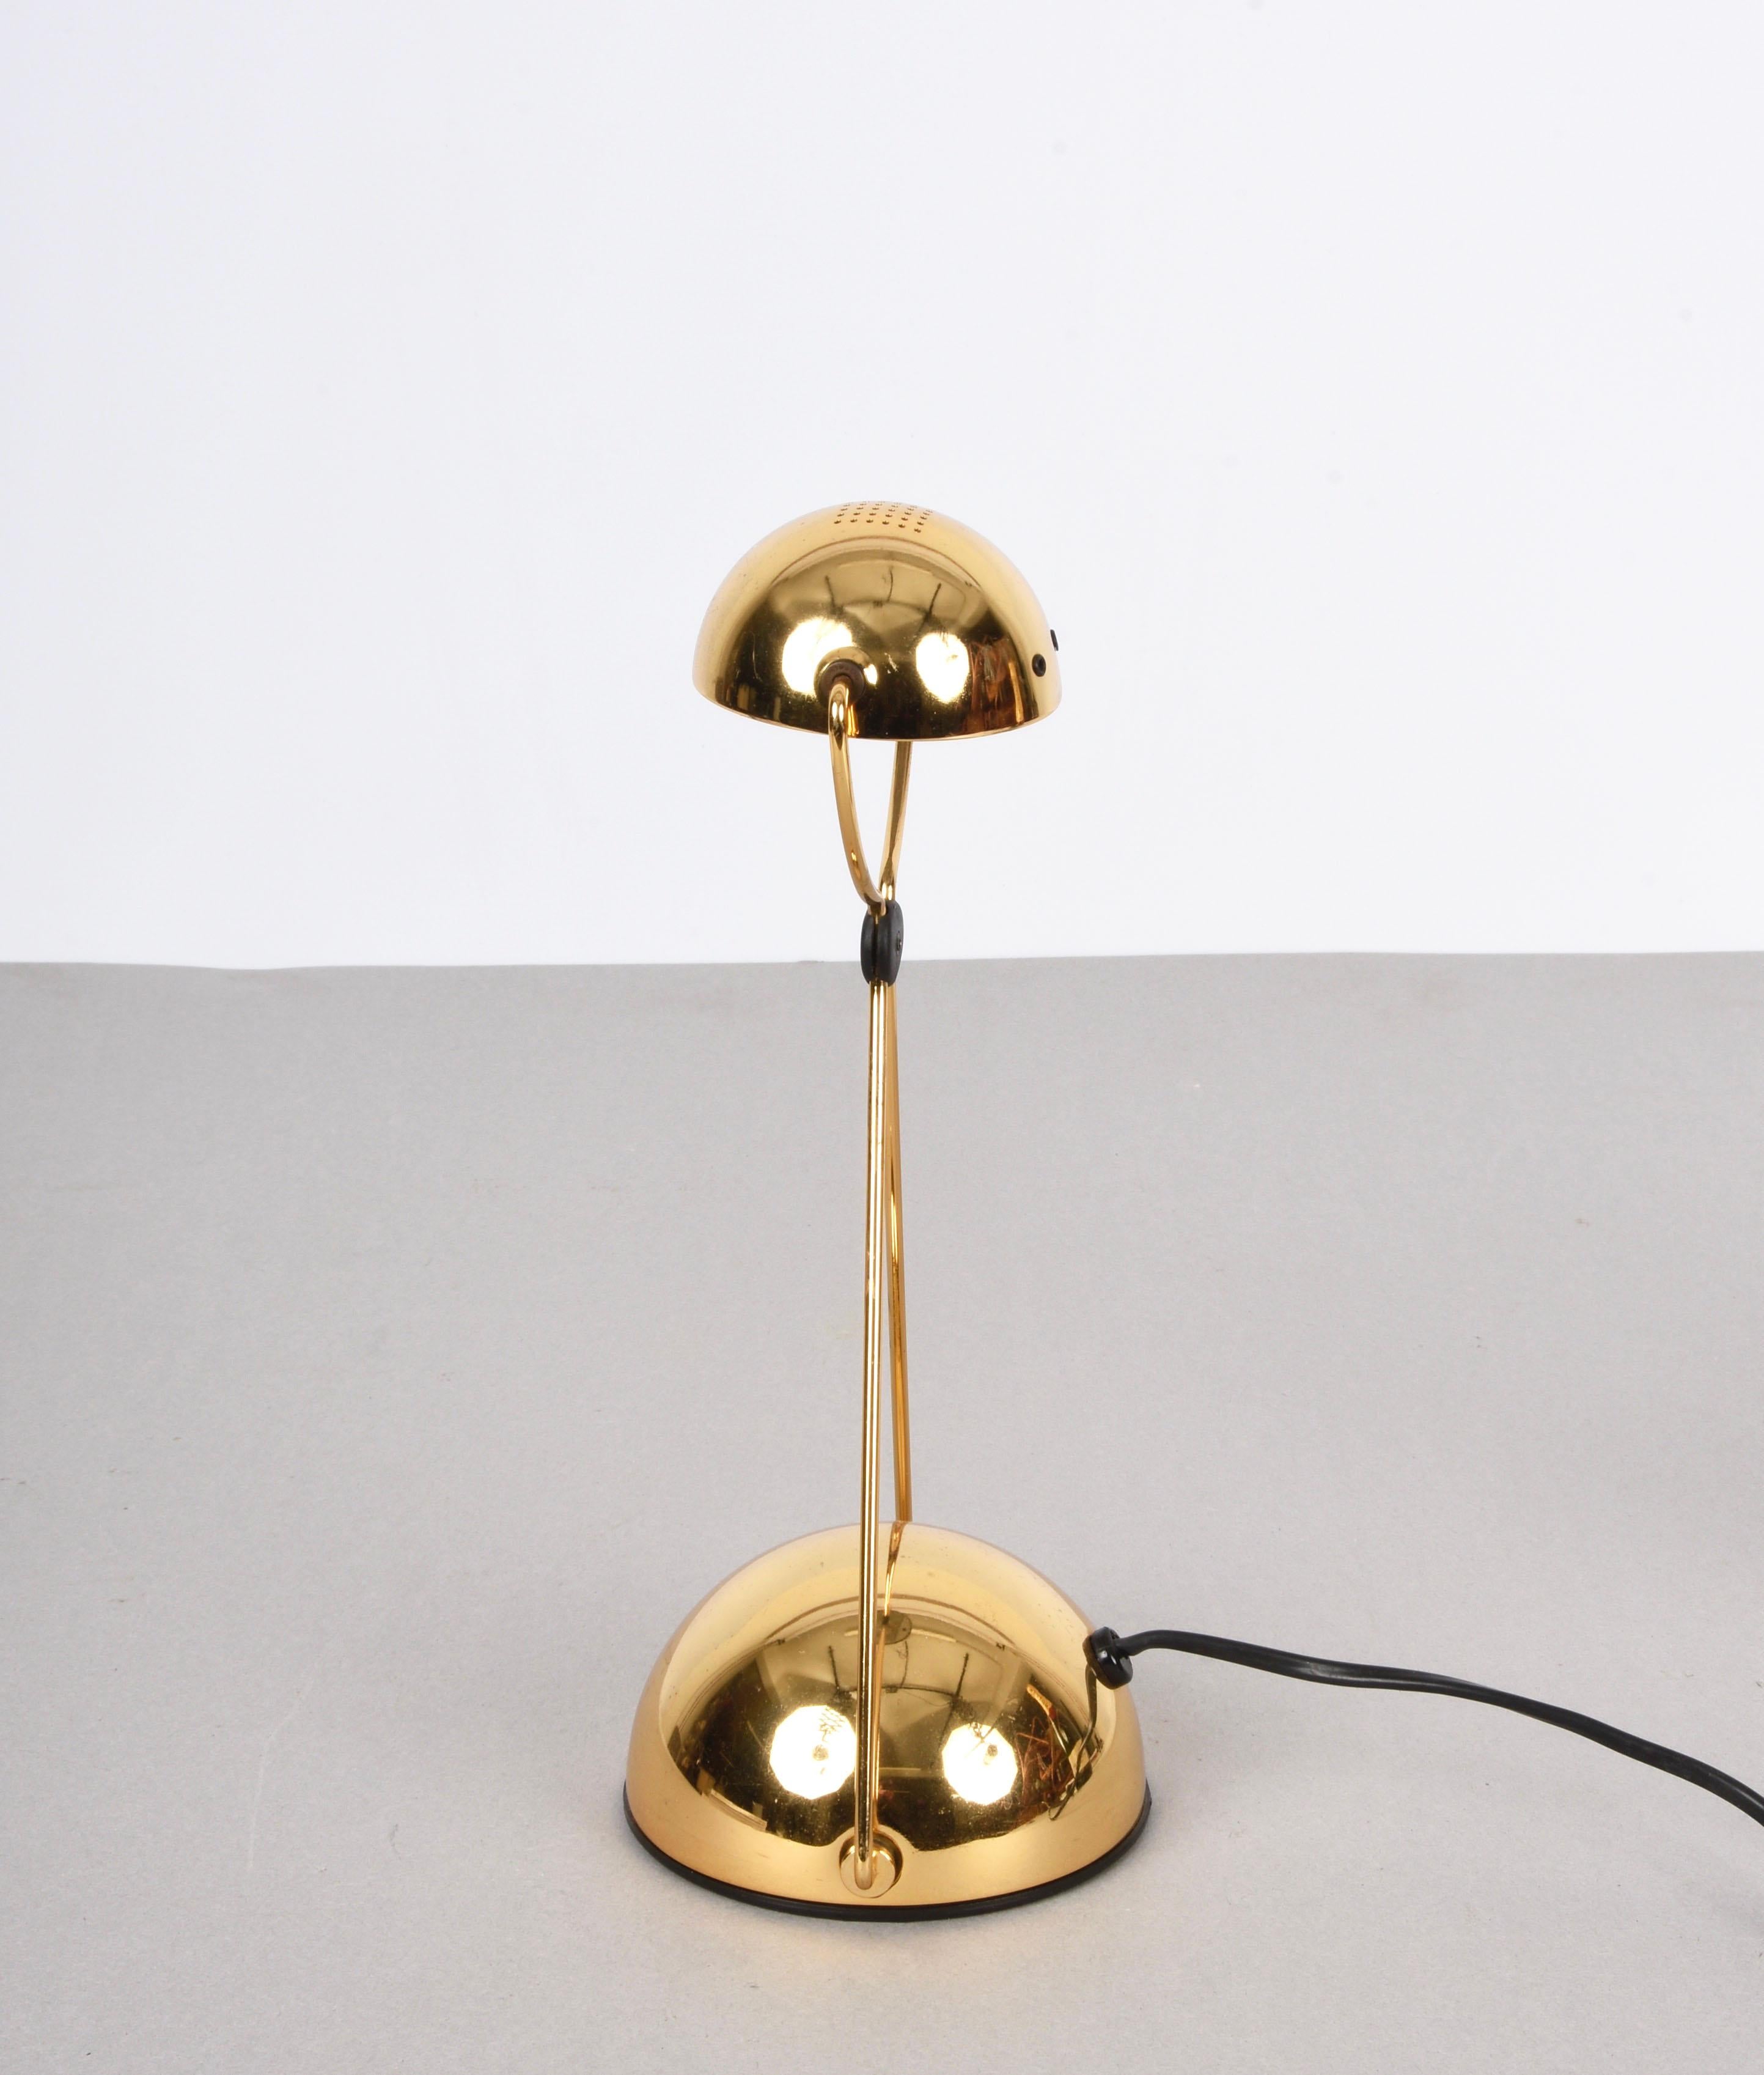 Amazing midcentury 'Meridiana' gold-plated metal halogen table lamp. This fantastic piece was designed by Paolo Francesco Piva for Stefano Cevoli in Italy during the 1980s.

This Minimalist, modern, tall and elegant halogen table lamp was designed